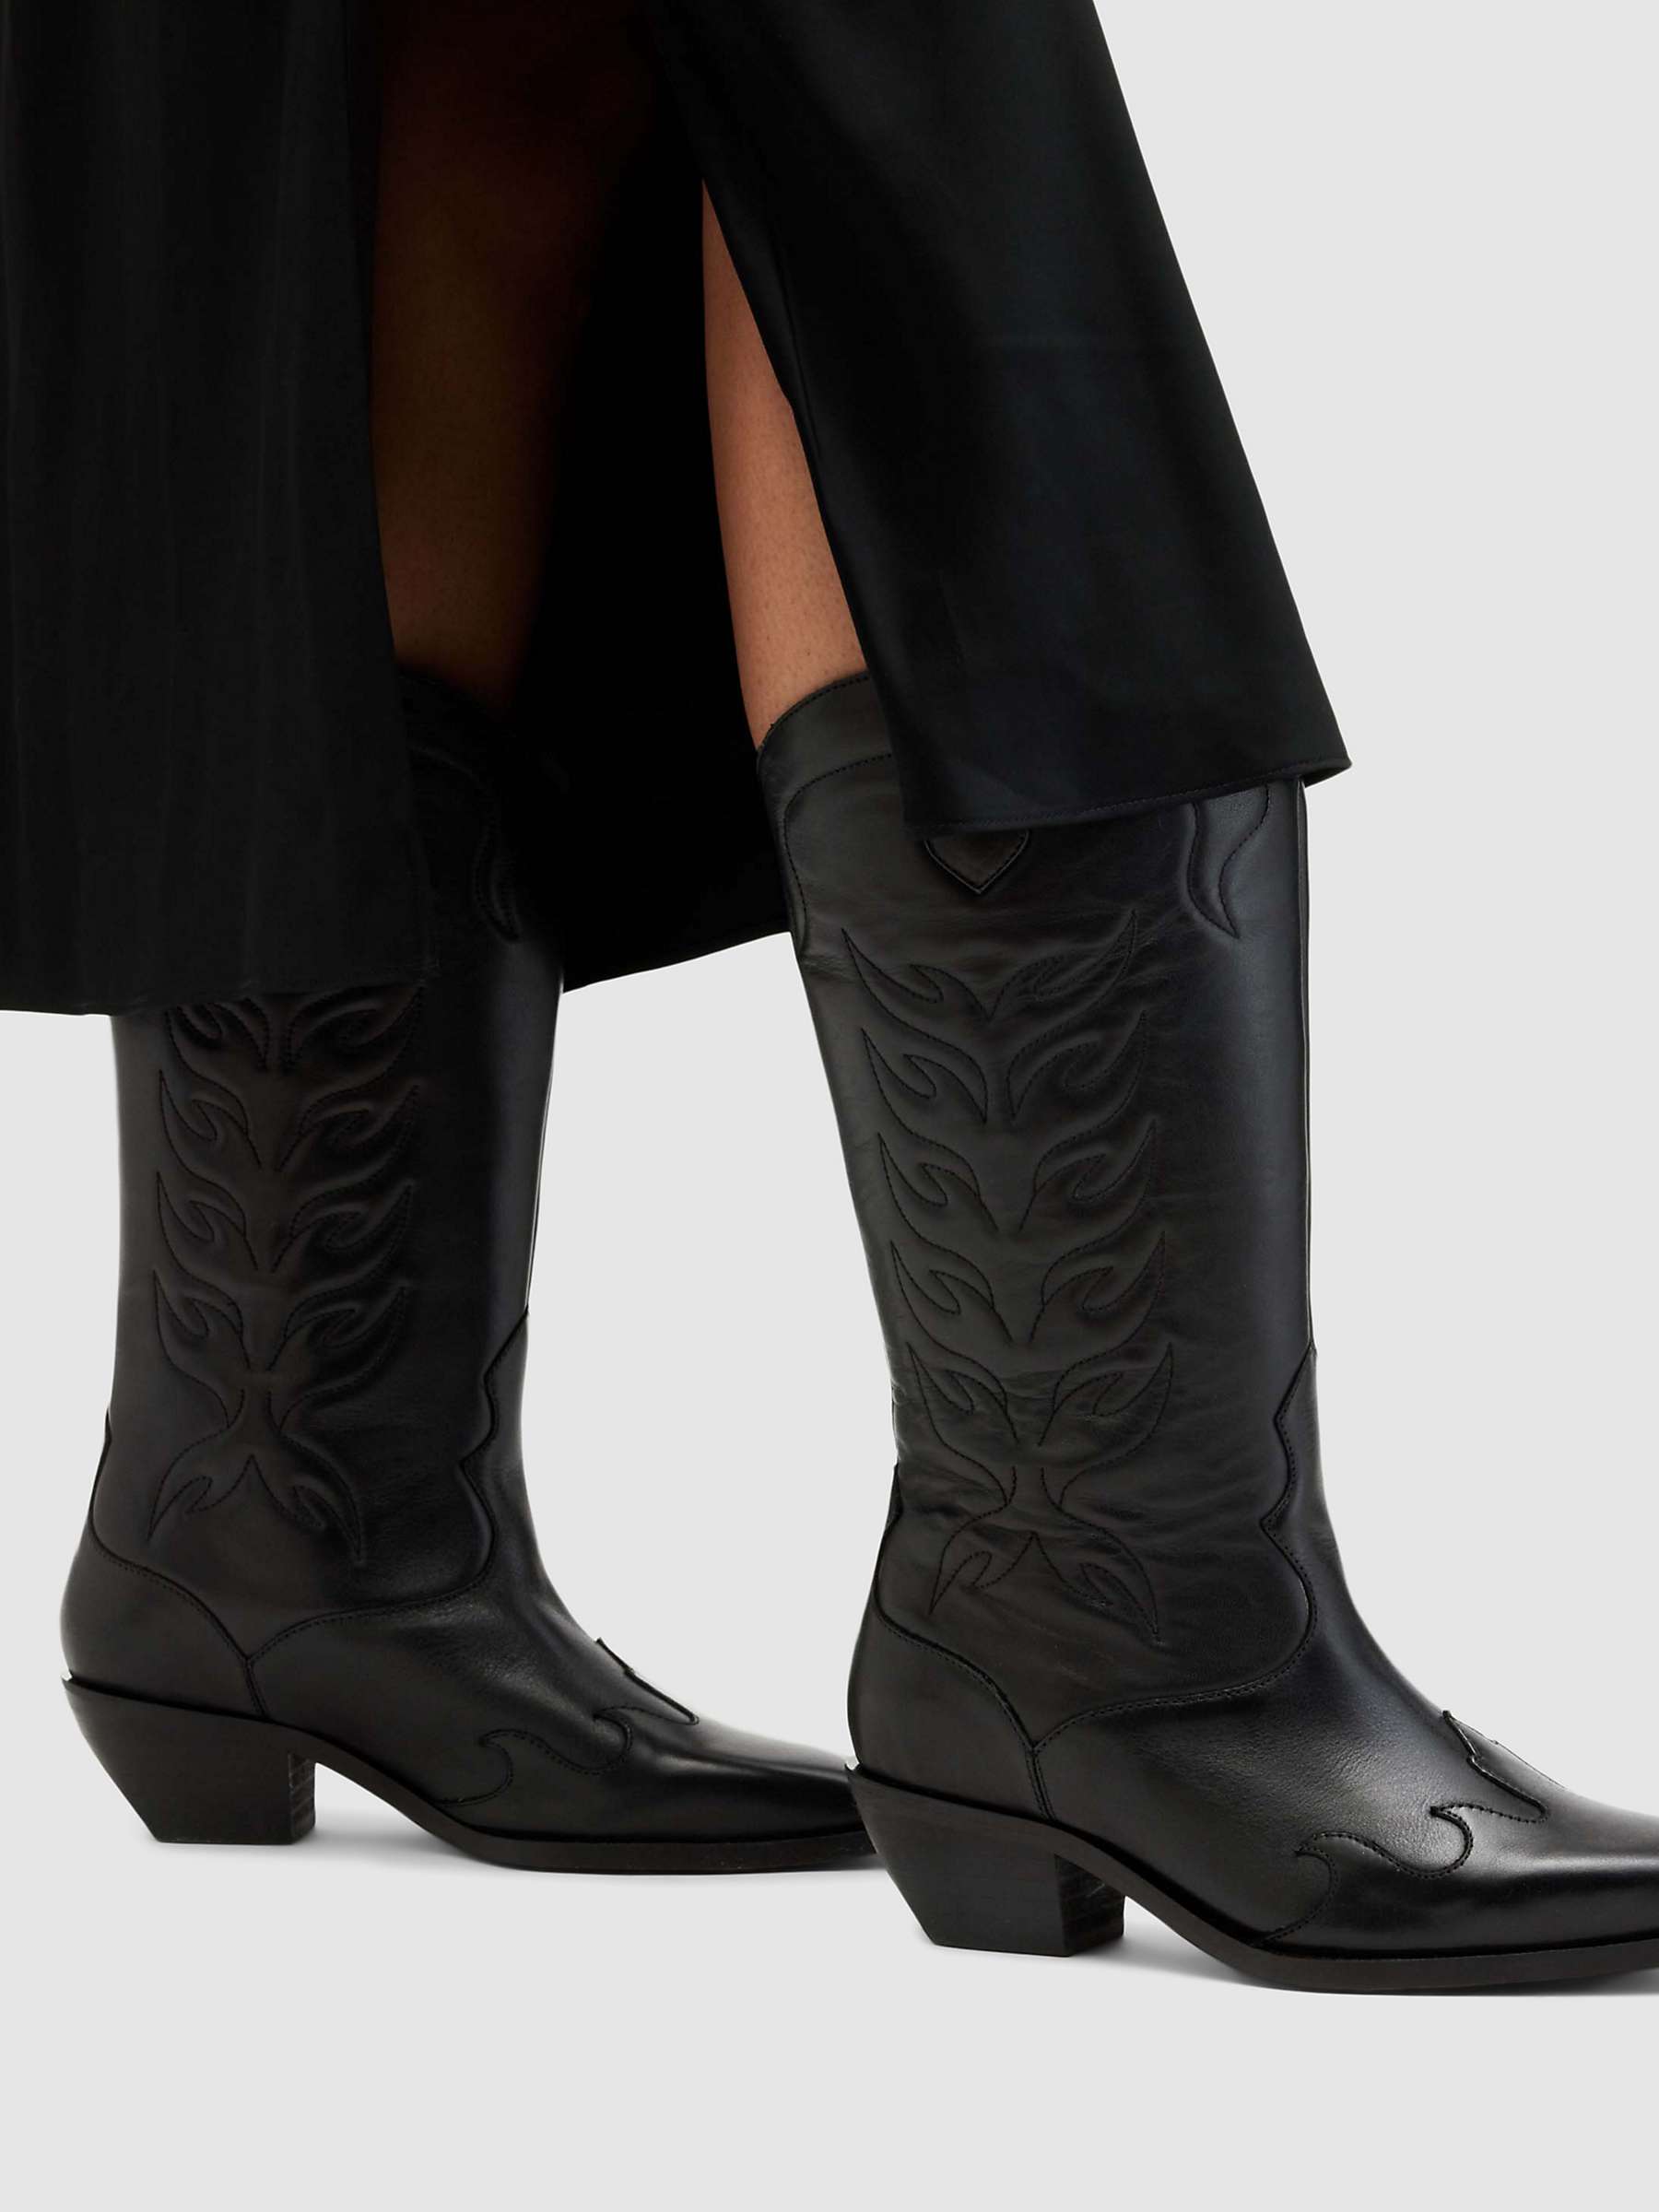 Buy AllSaints Dolly Leather Cowboy Boots, Black Online at johnlewis.com